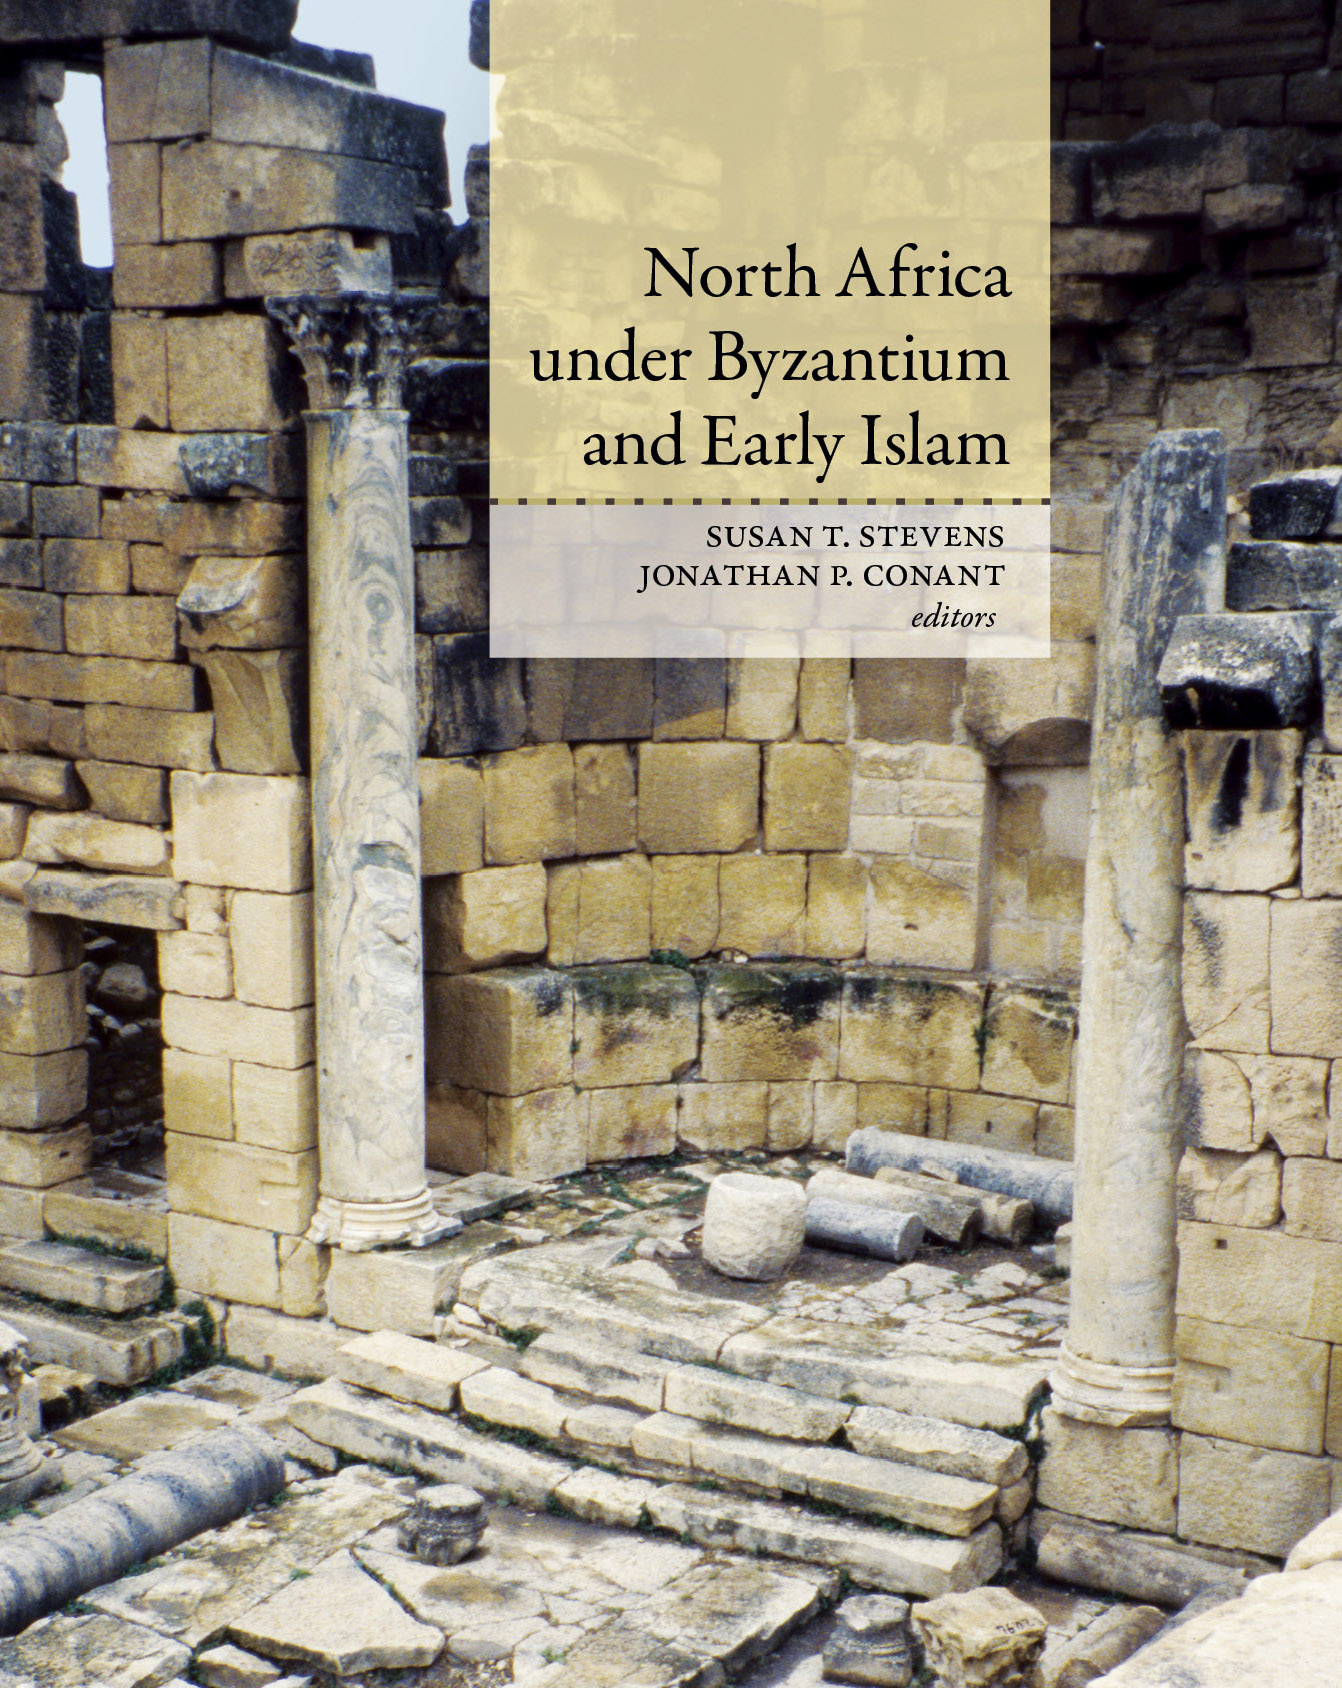 North Africa under Byzantium and Early Islam